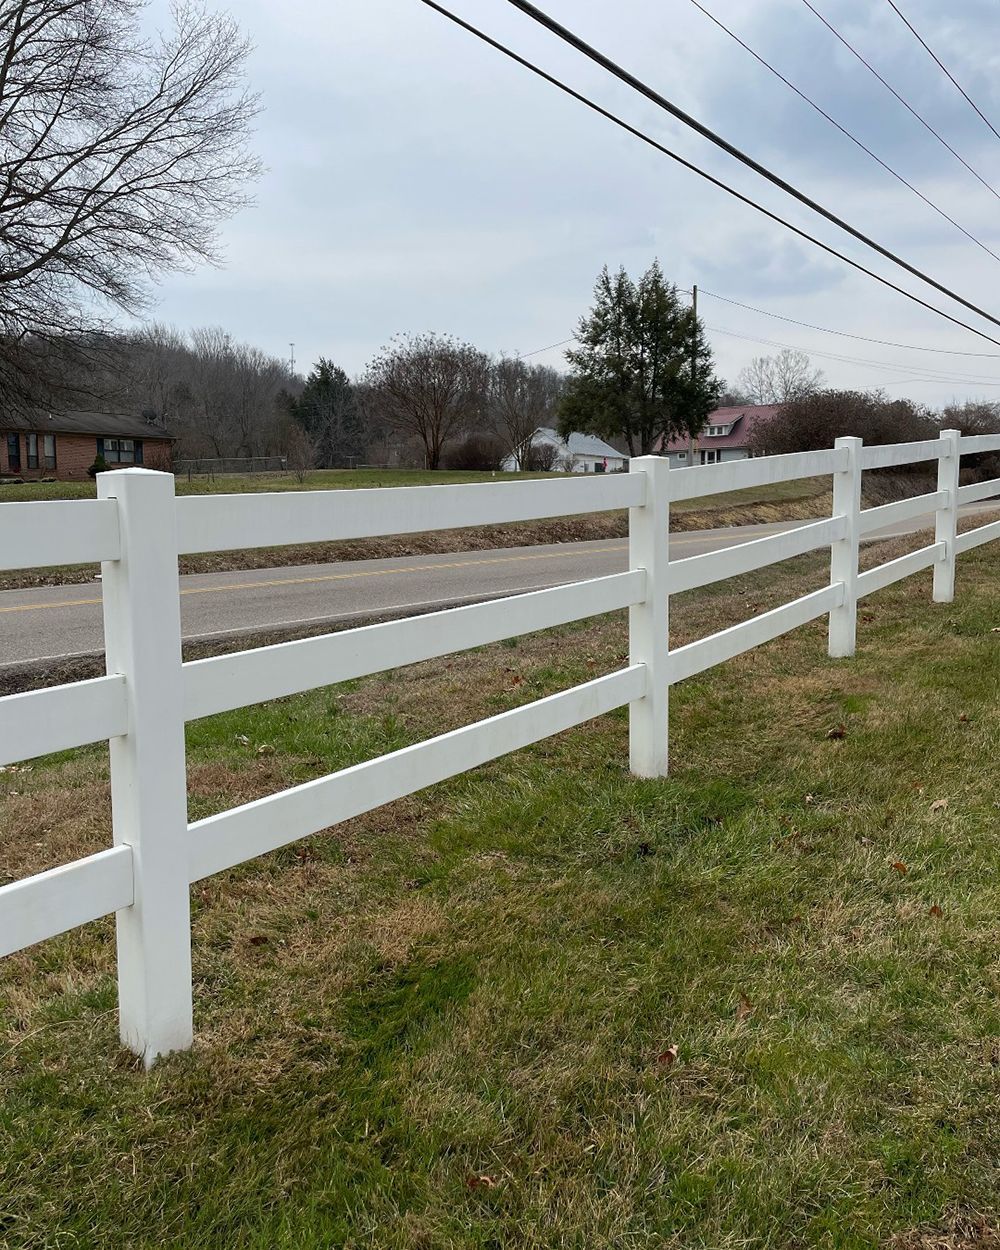 A white fence surrounds a grassy field next to a road